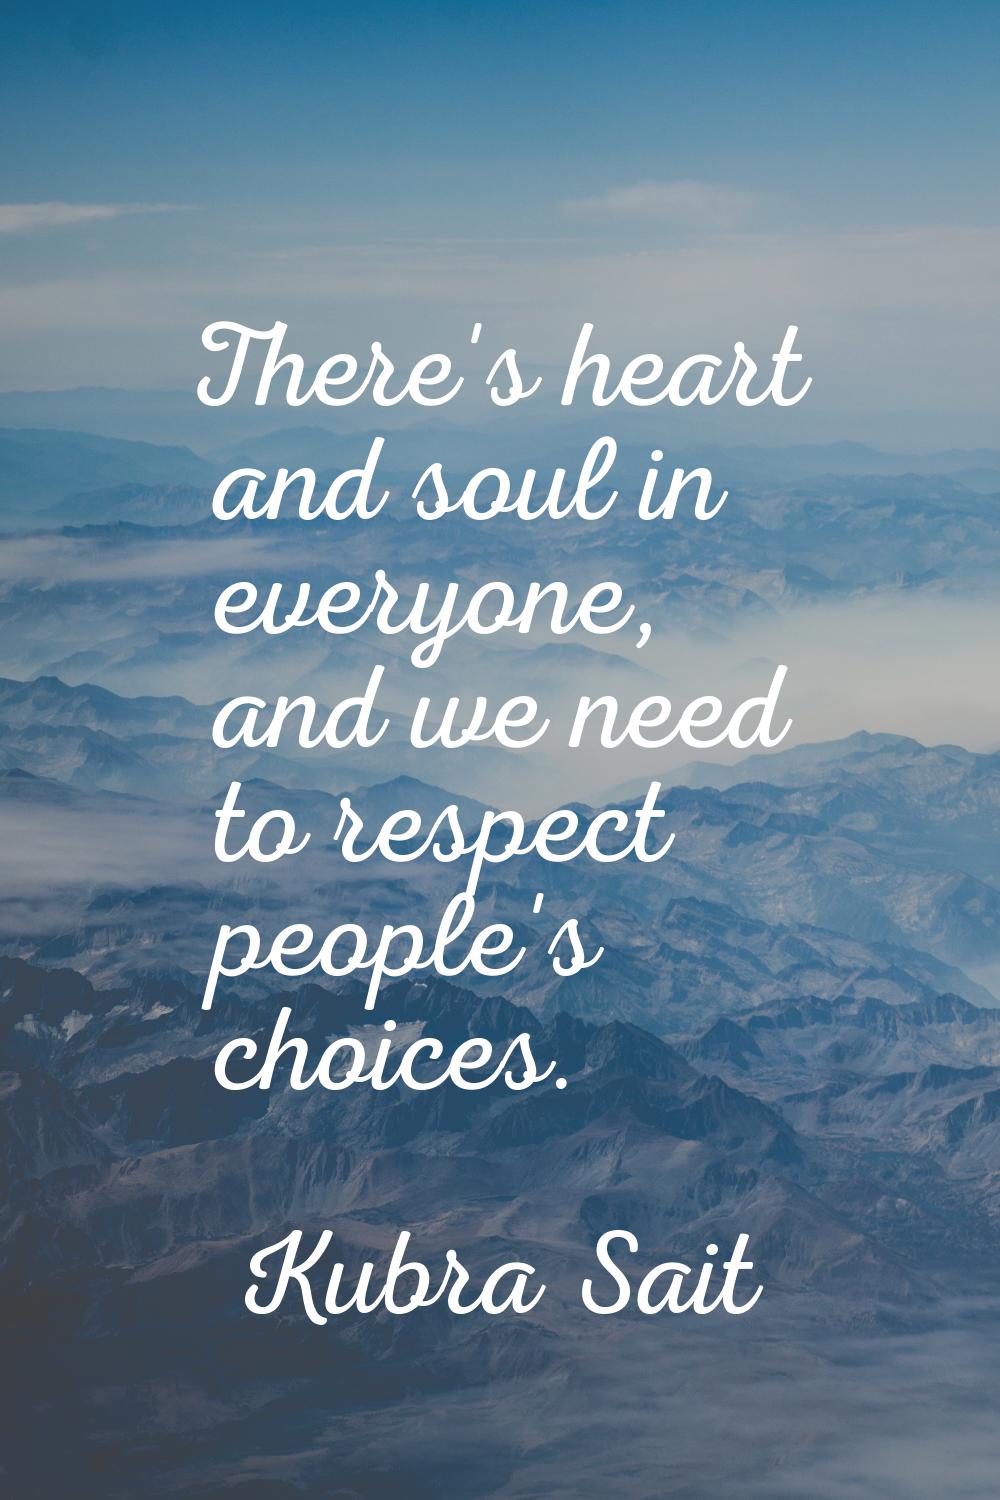 There's heart and soul in everyone, and we need to respect people's choices.